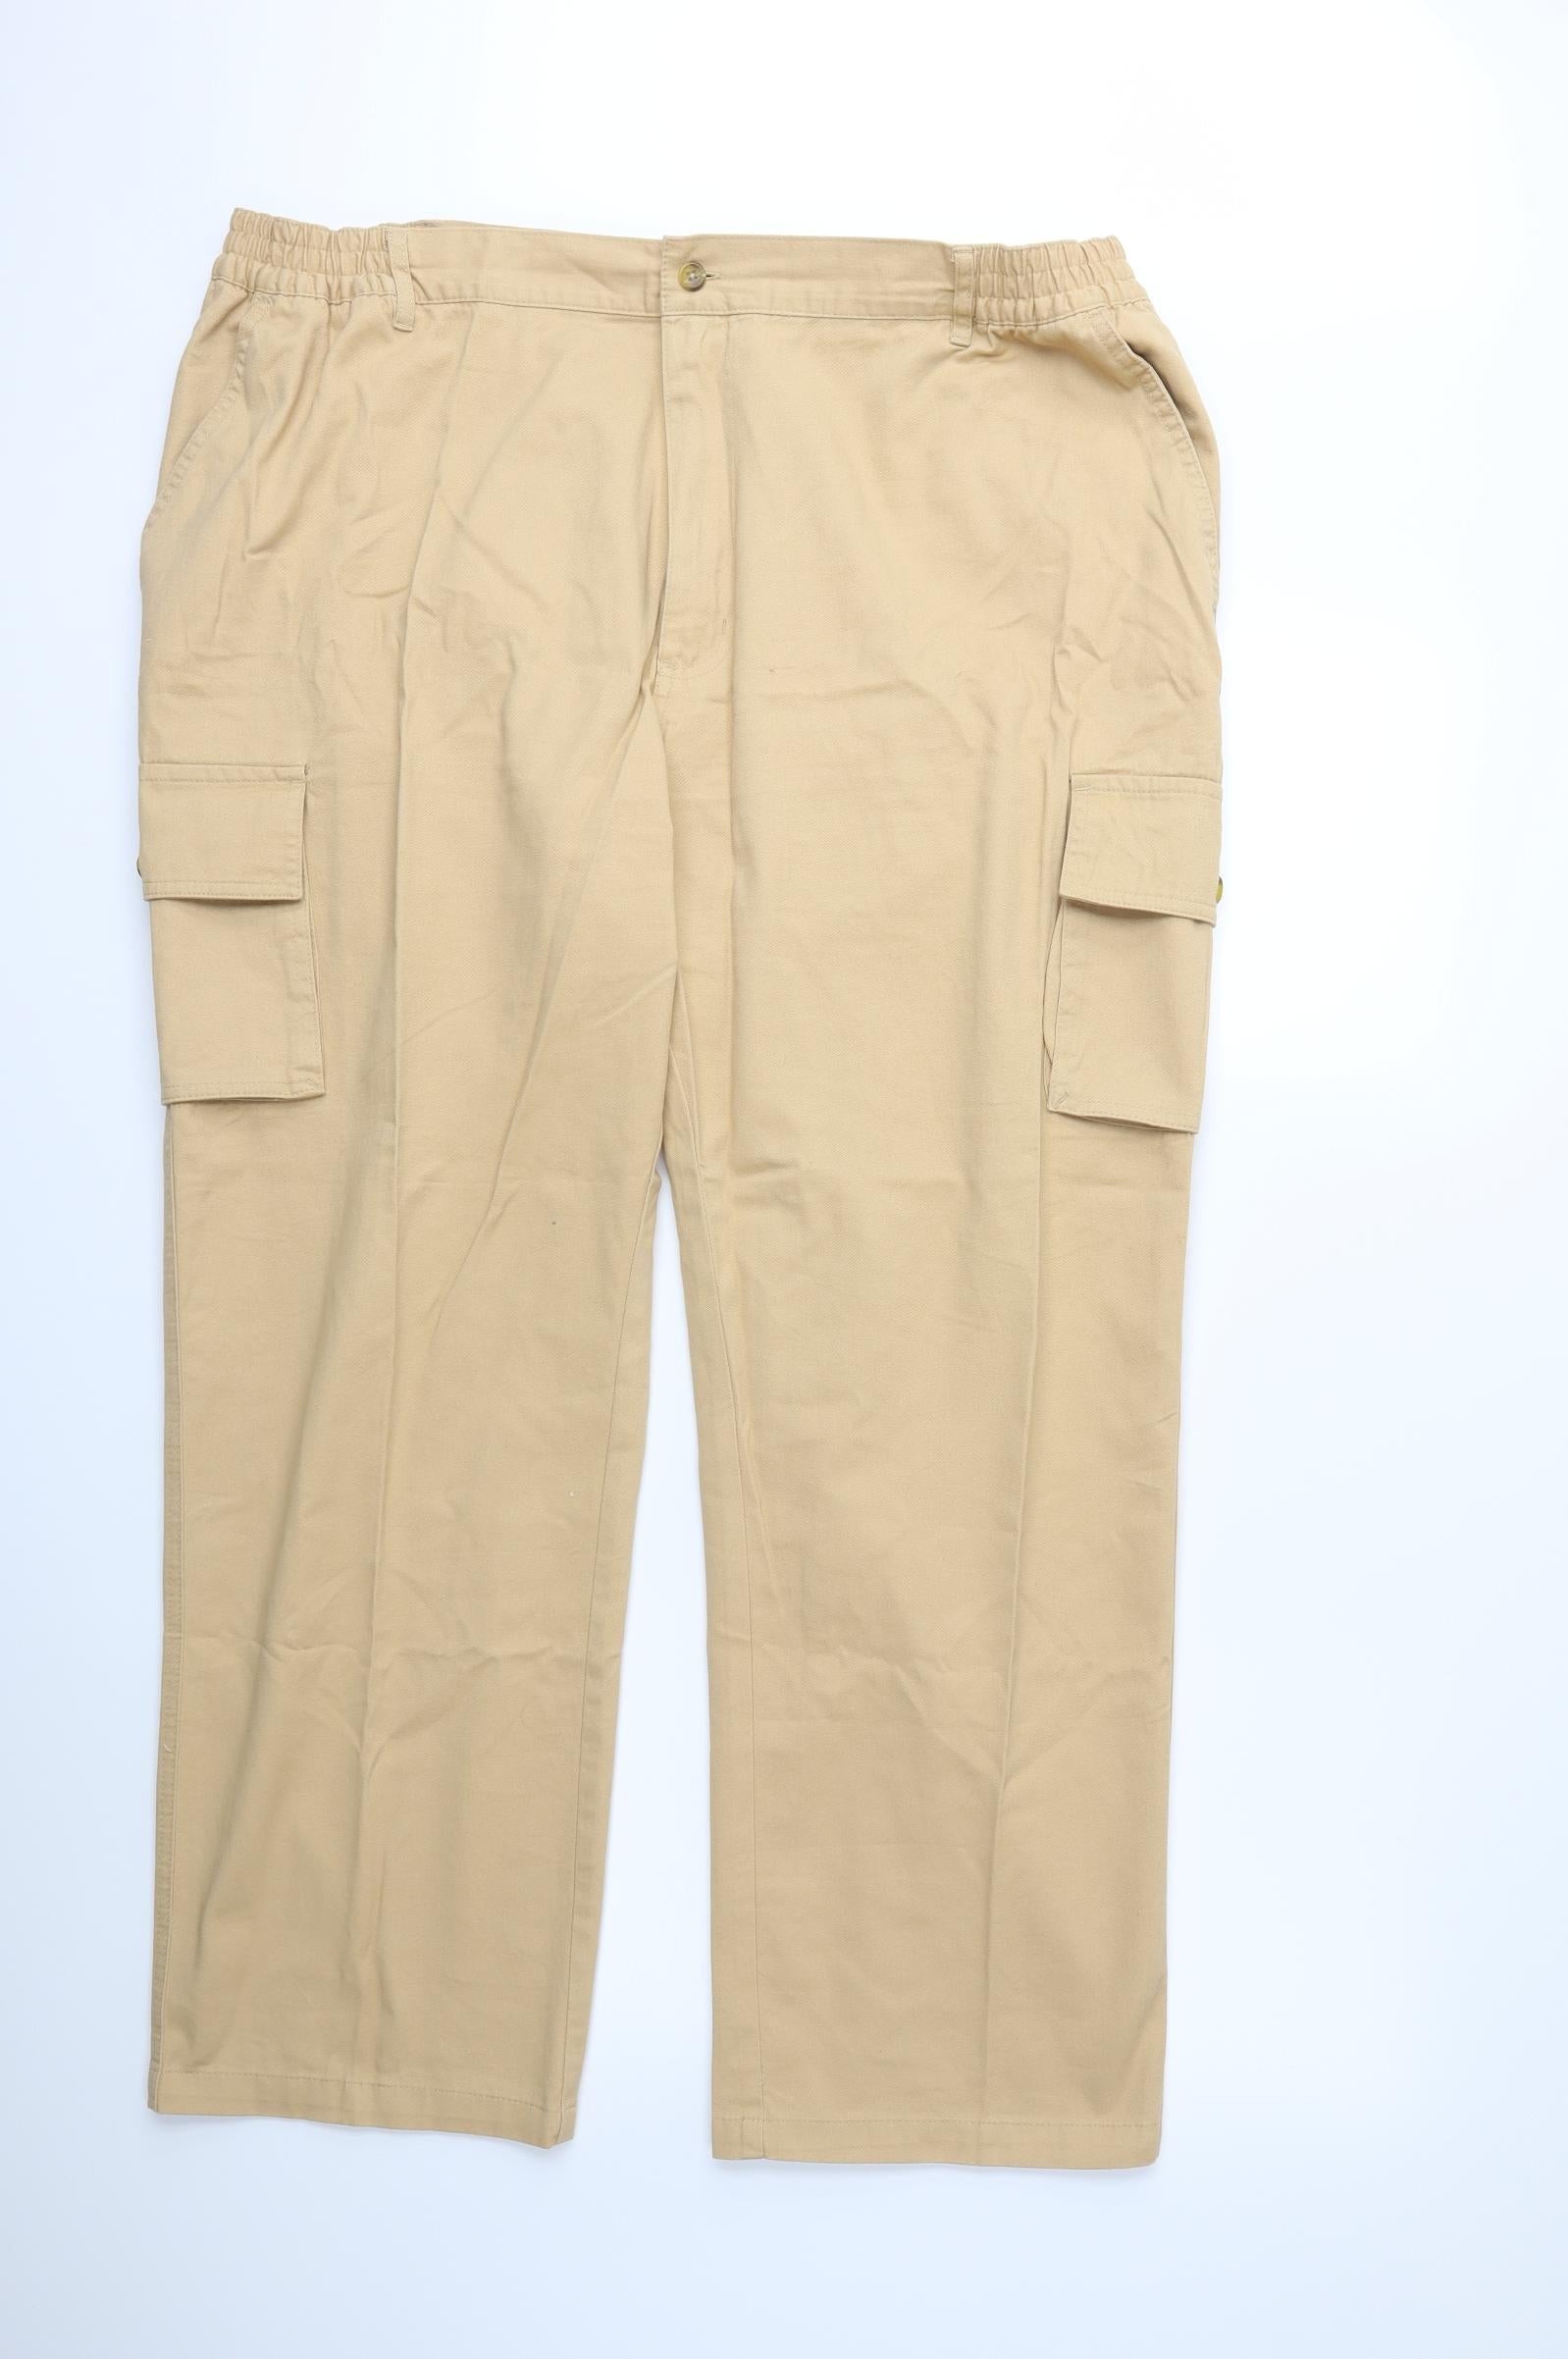 Cotton Traders Trousers  Stretch Cargo Trousers  Mens  Pennylane  Dobermans